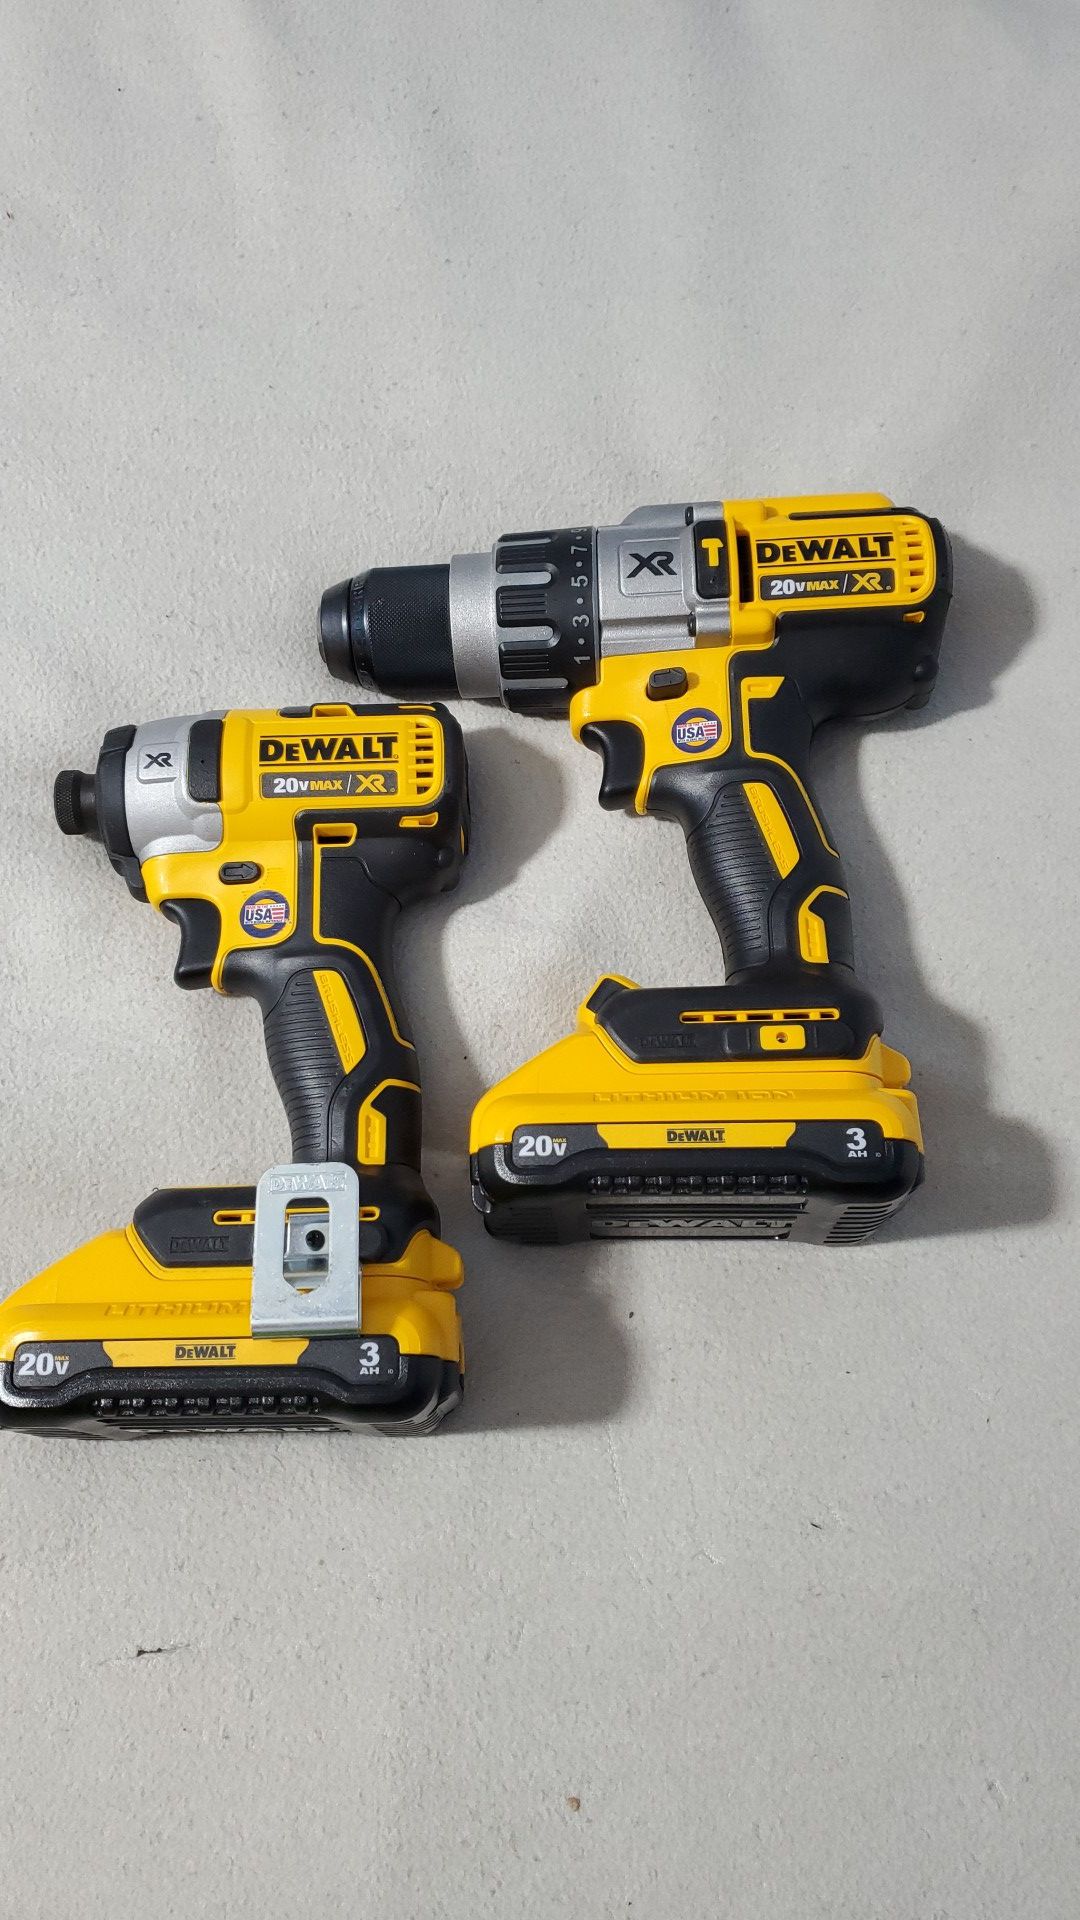 Dewalt 20V Max XR brushless Half inch Hammer drill Driver with 3ah battery. Also a new 1/4in Impact driver, xr brushless.